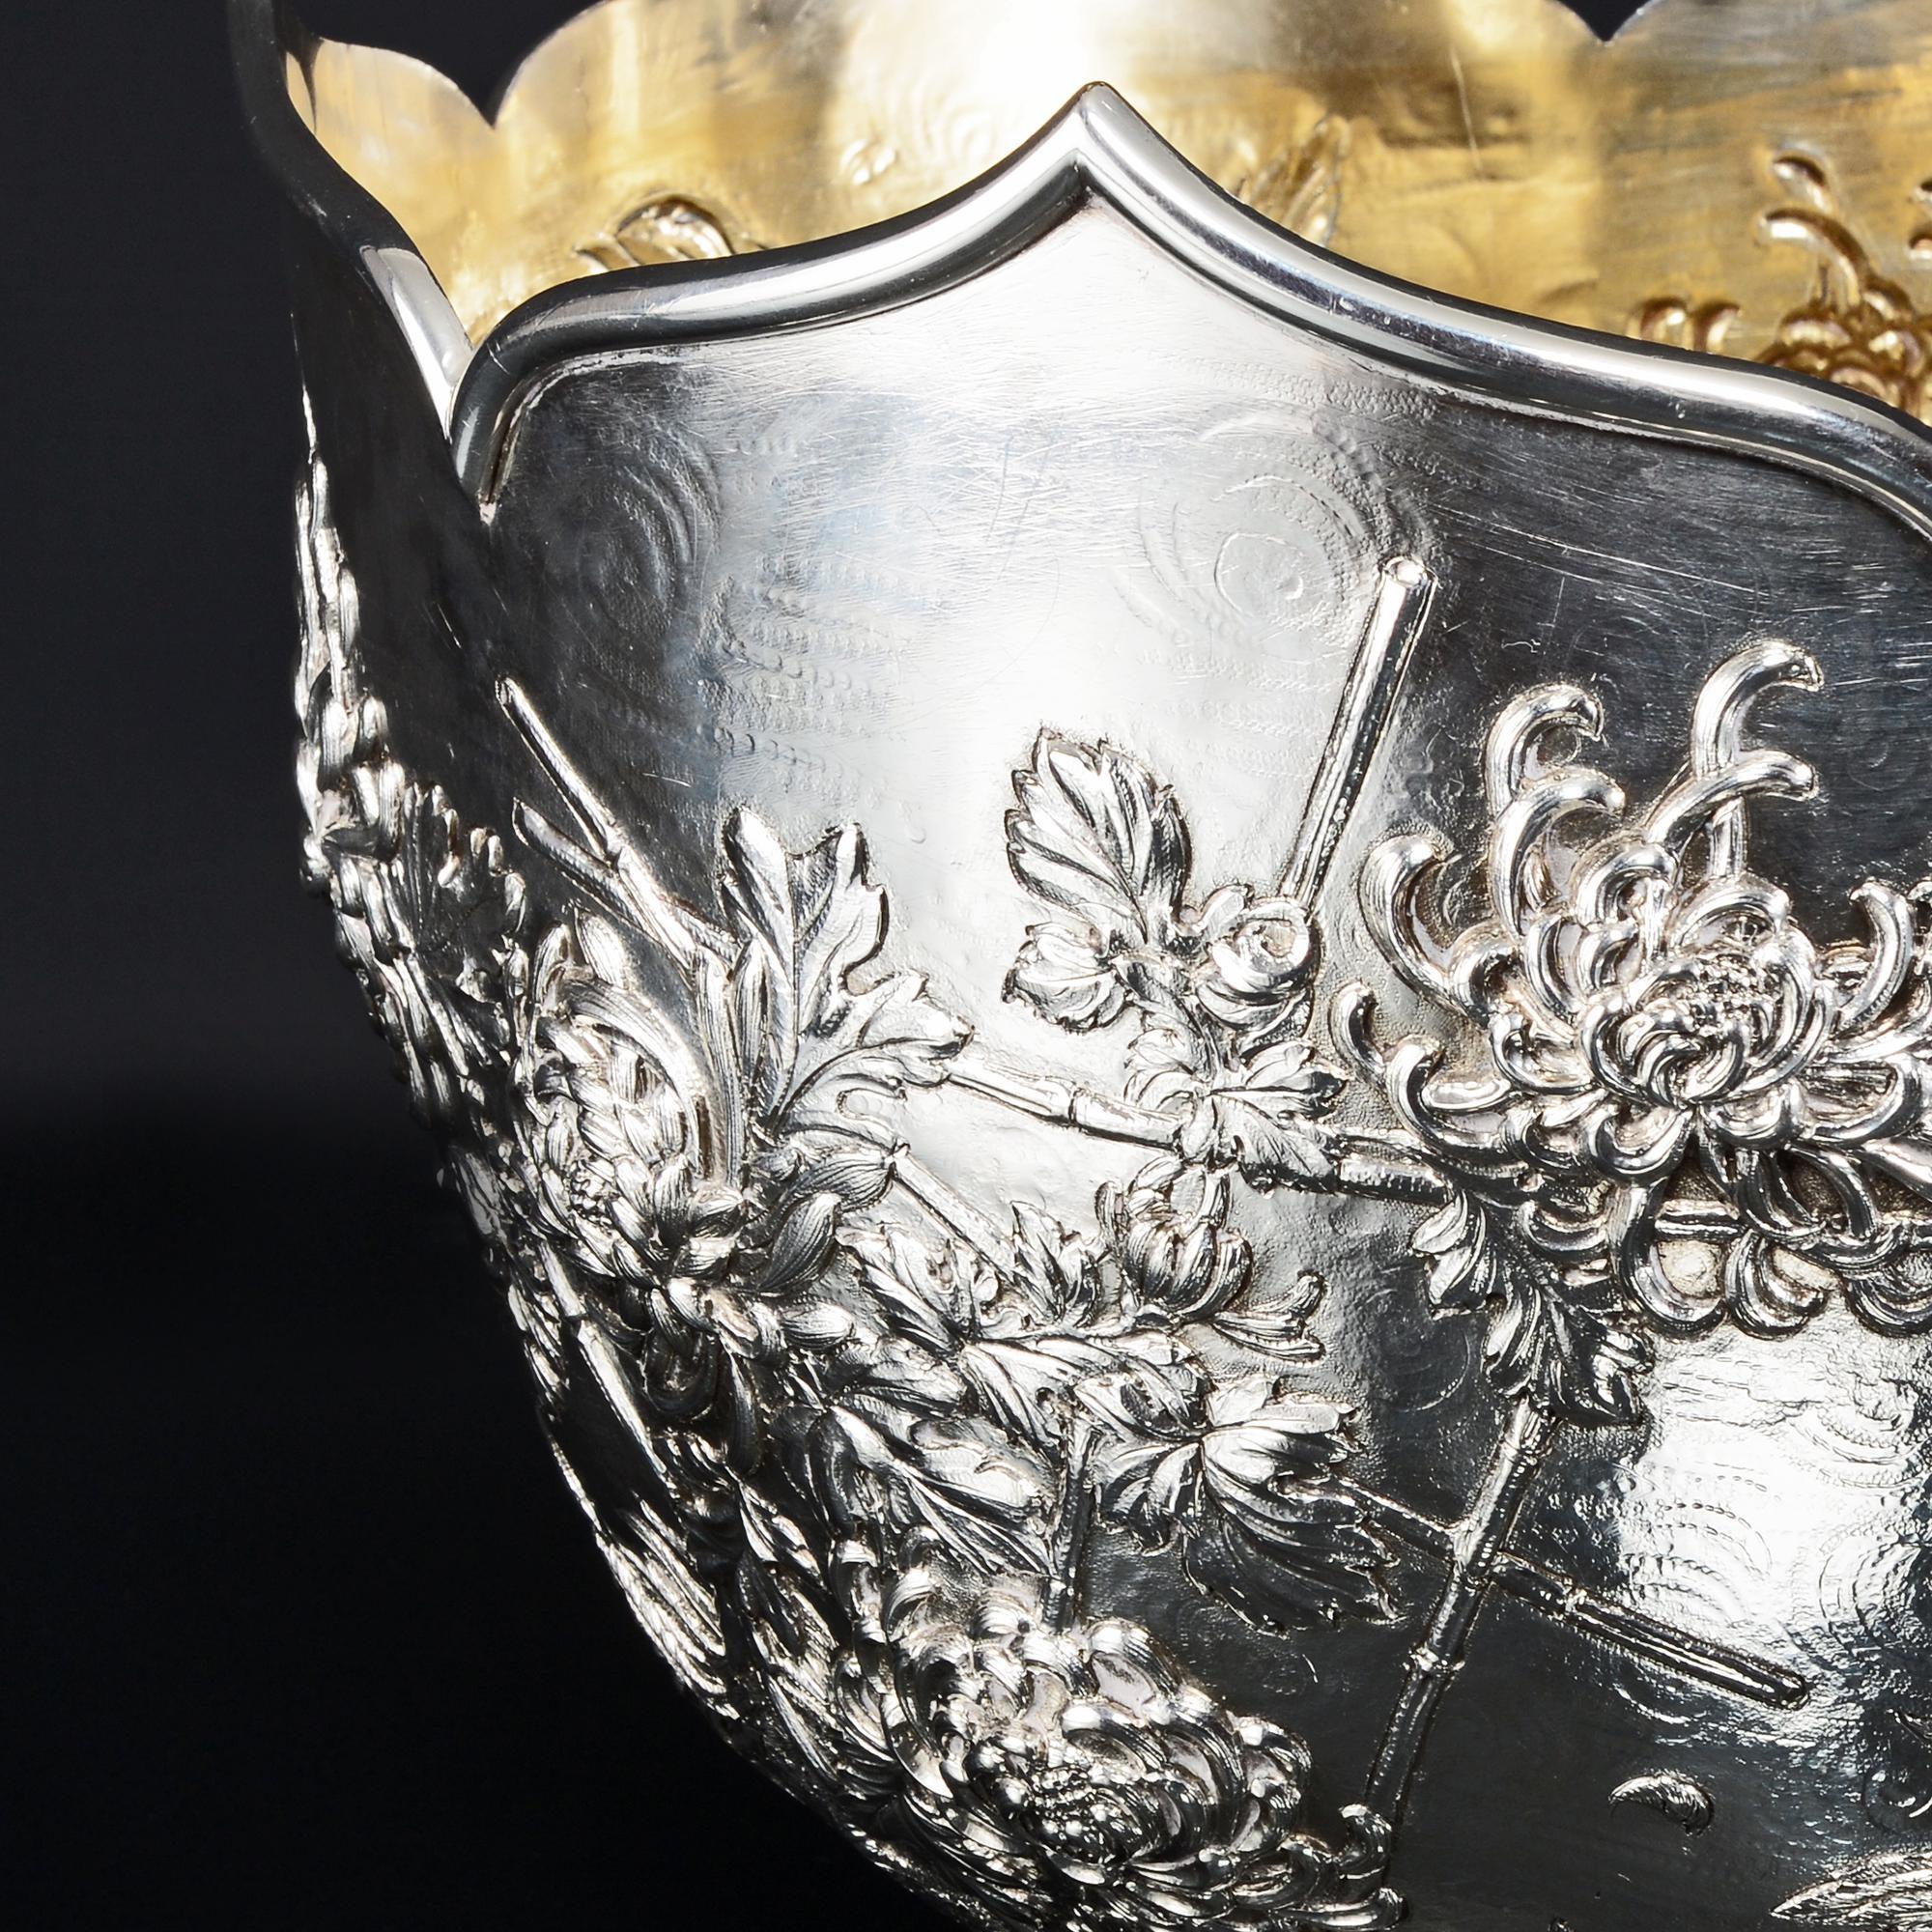 This amazing antique Edwardian sterling silver bowl is entirely handmade and styled after a Chinese design. The reliefs of chrysanthemums and fighting cocks are exceptional, being hand-chased with incredibly fine detail, even including loose